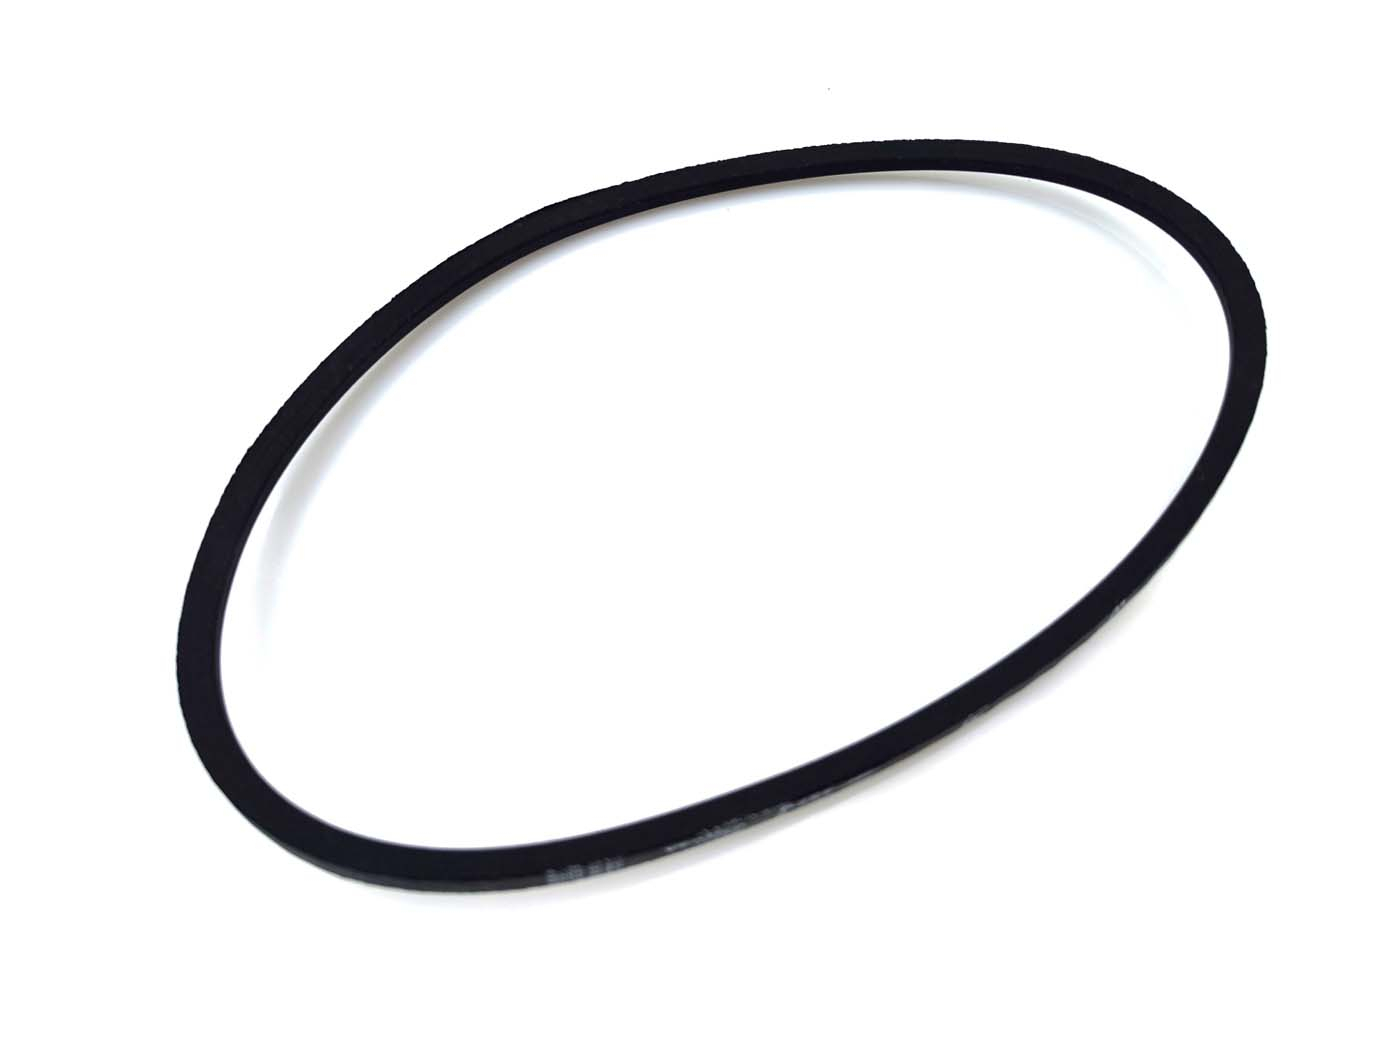 Drive Belt Moped 940x9.8x8.3 Mm For Peugeot 103, 104 Moped